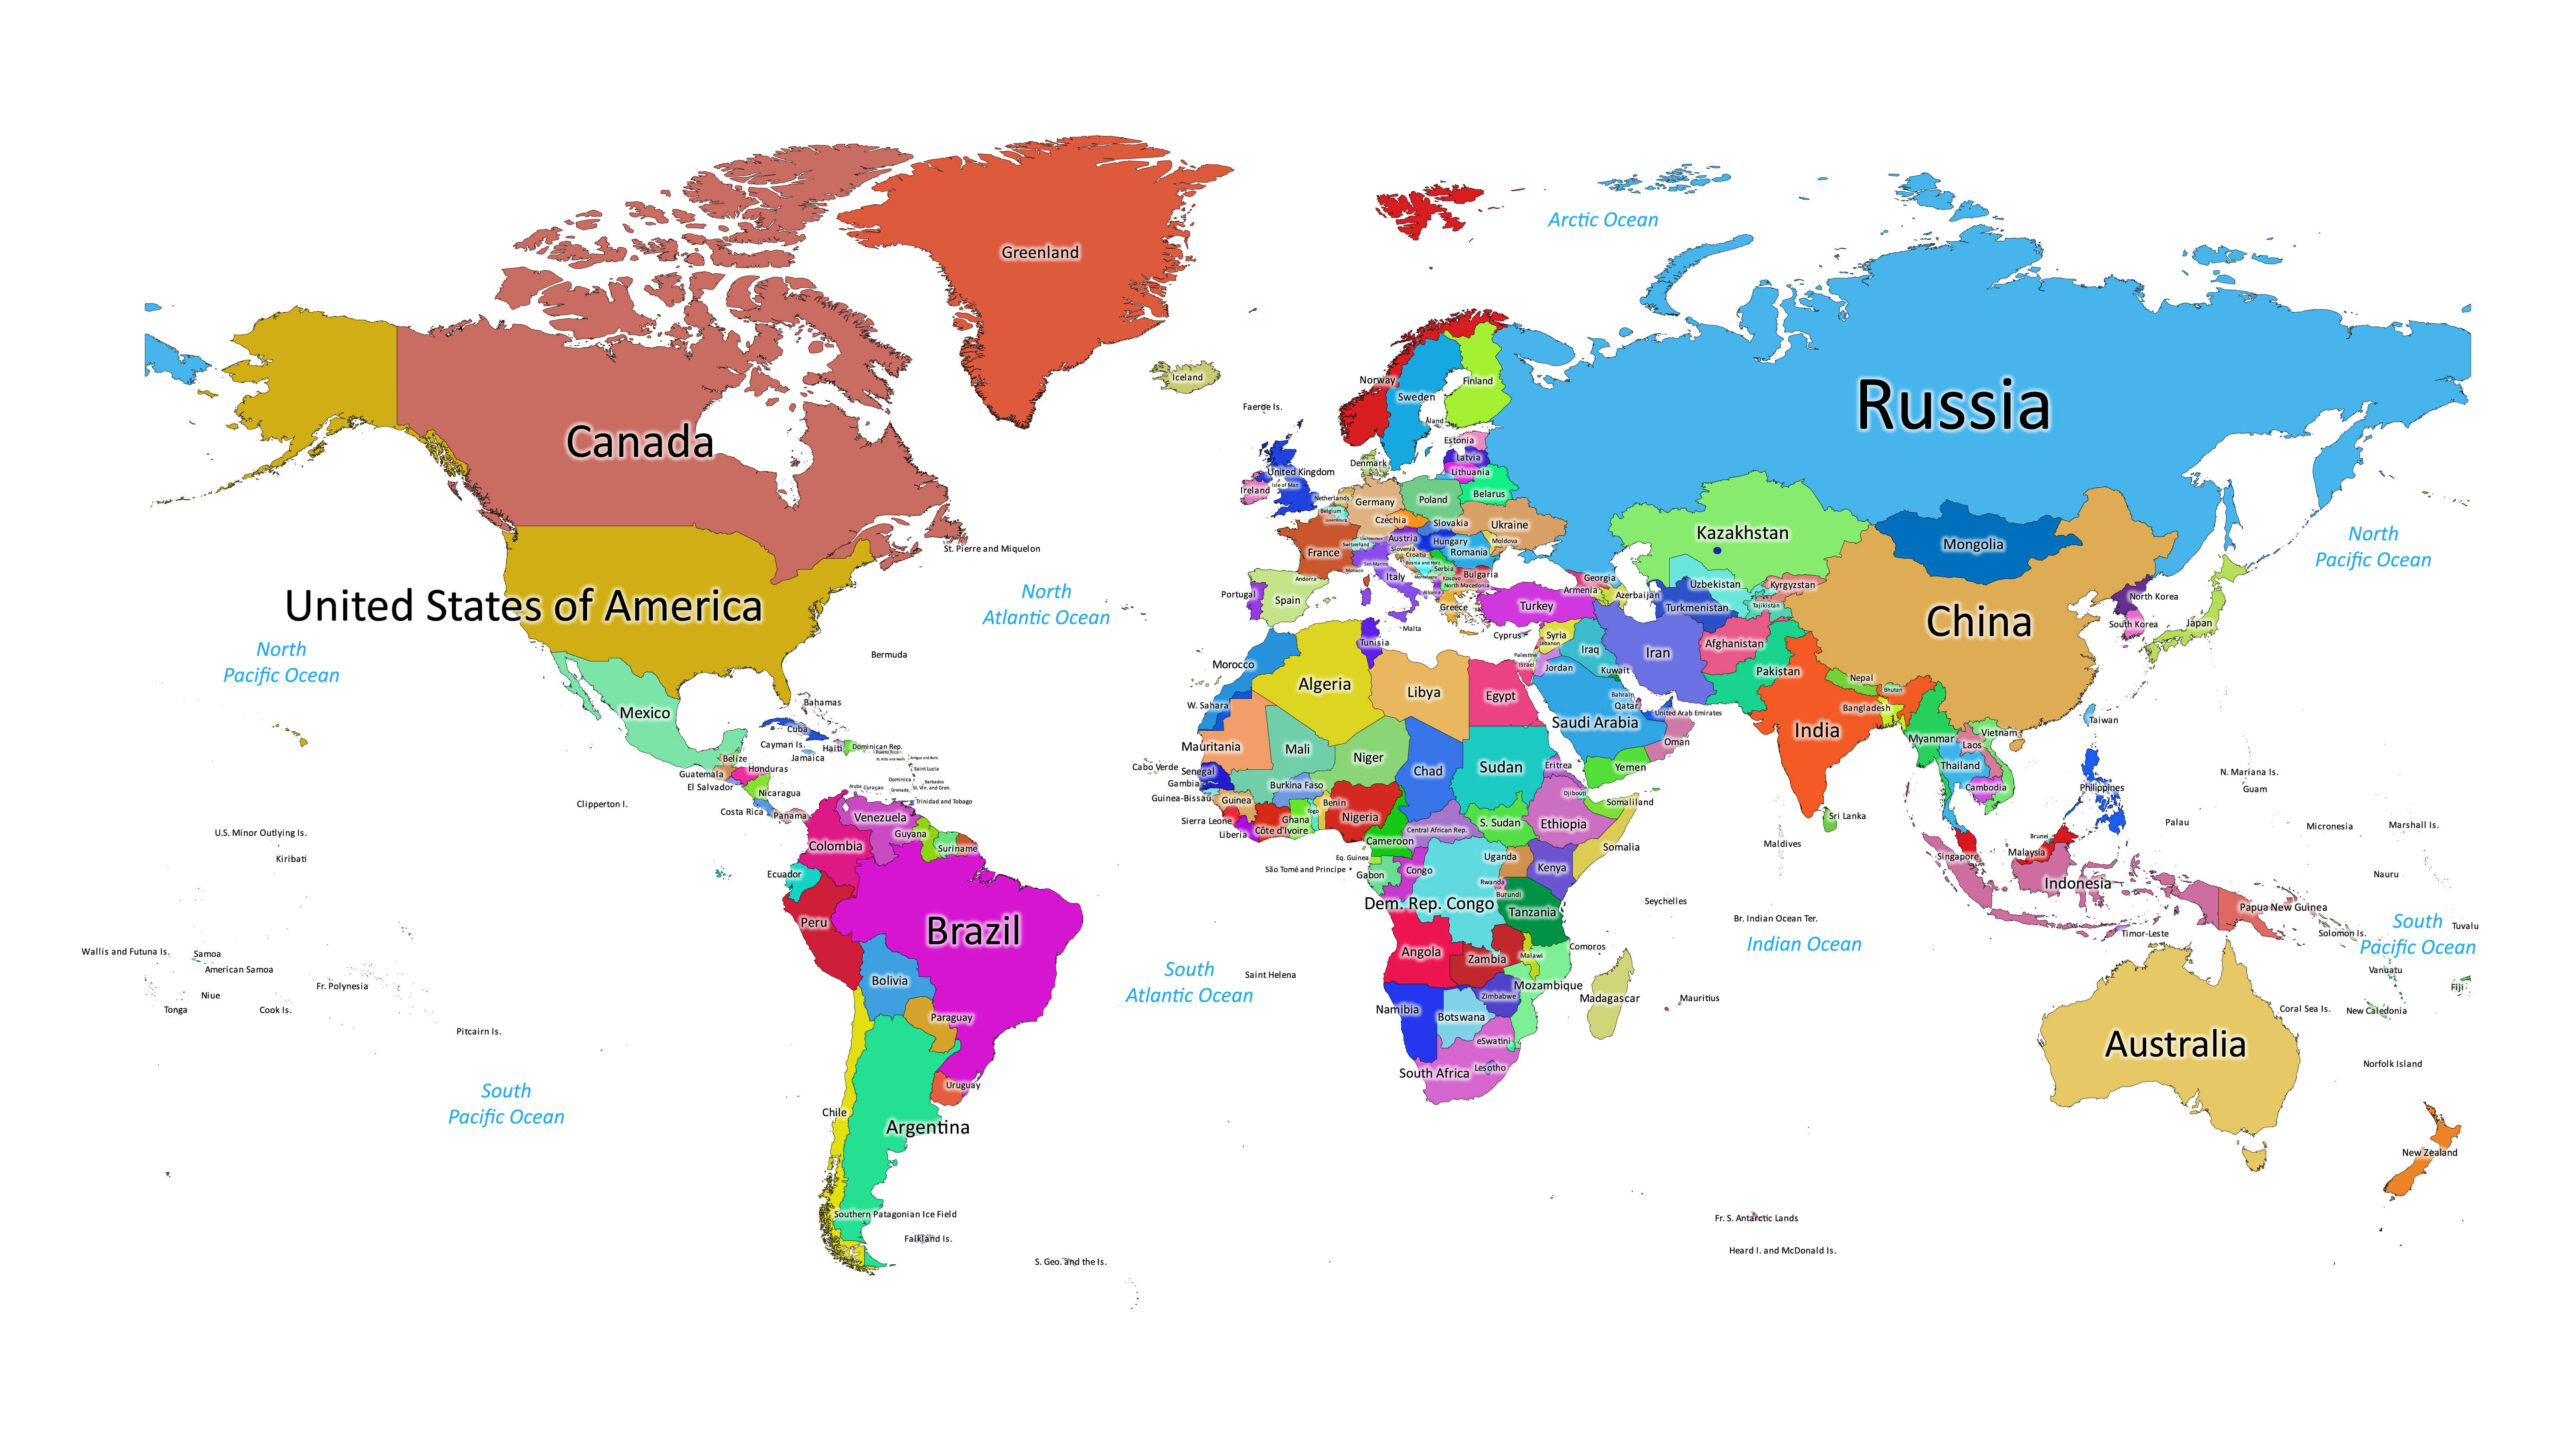 Labeled world map